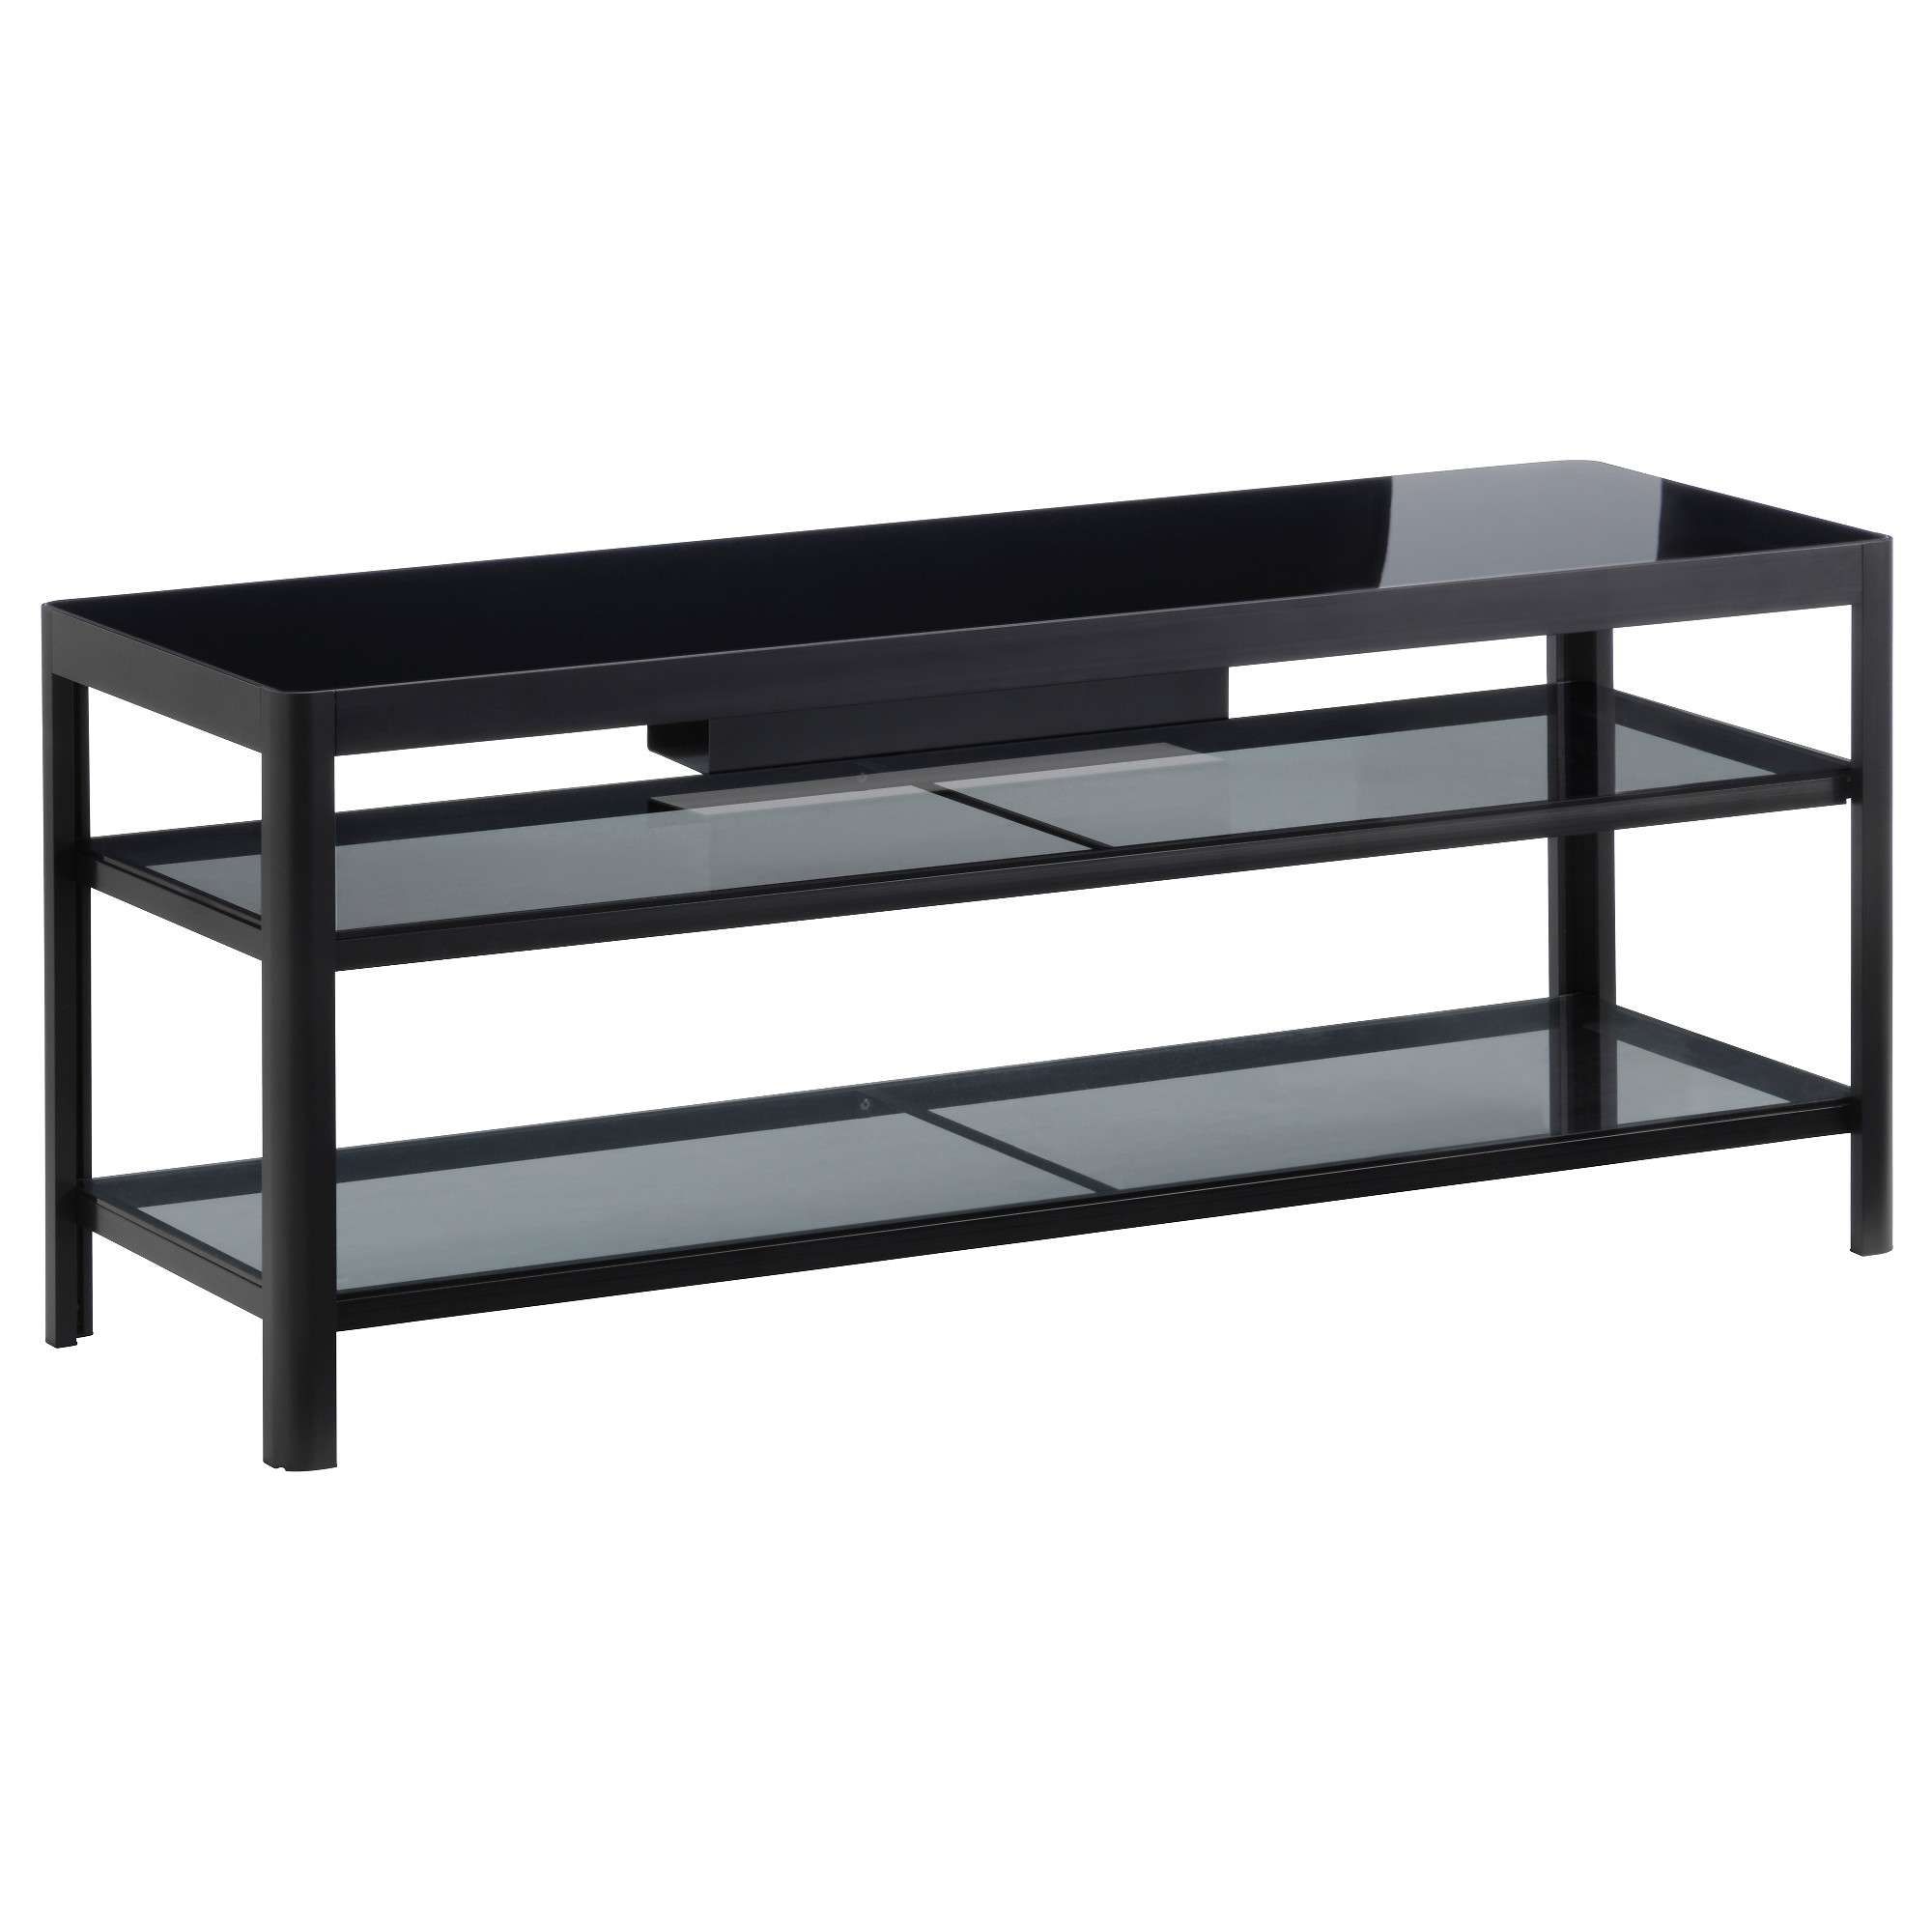 Gettorp Tv Unit – Black/black – Ikea In Black Glass Tv Cabinets (View 14 of 20)